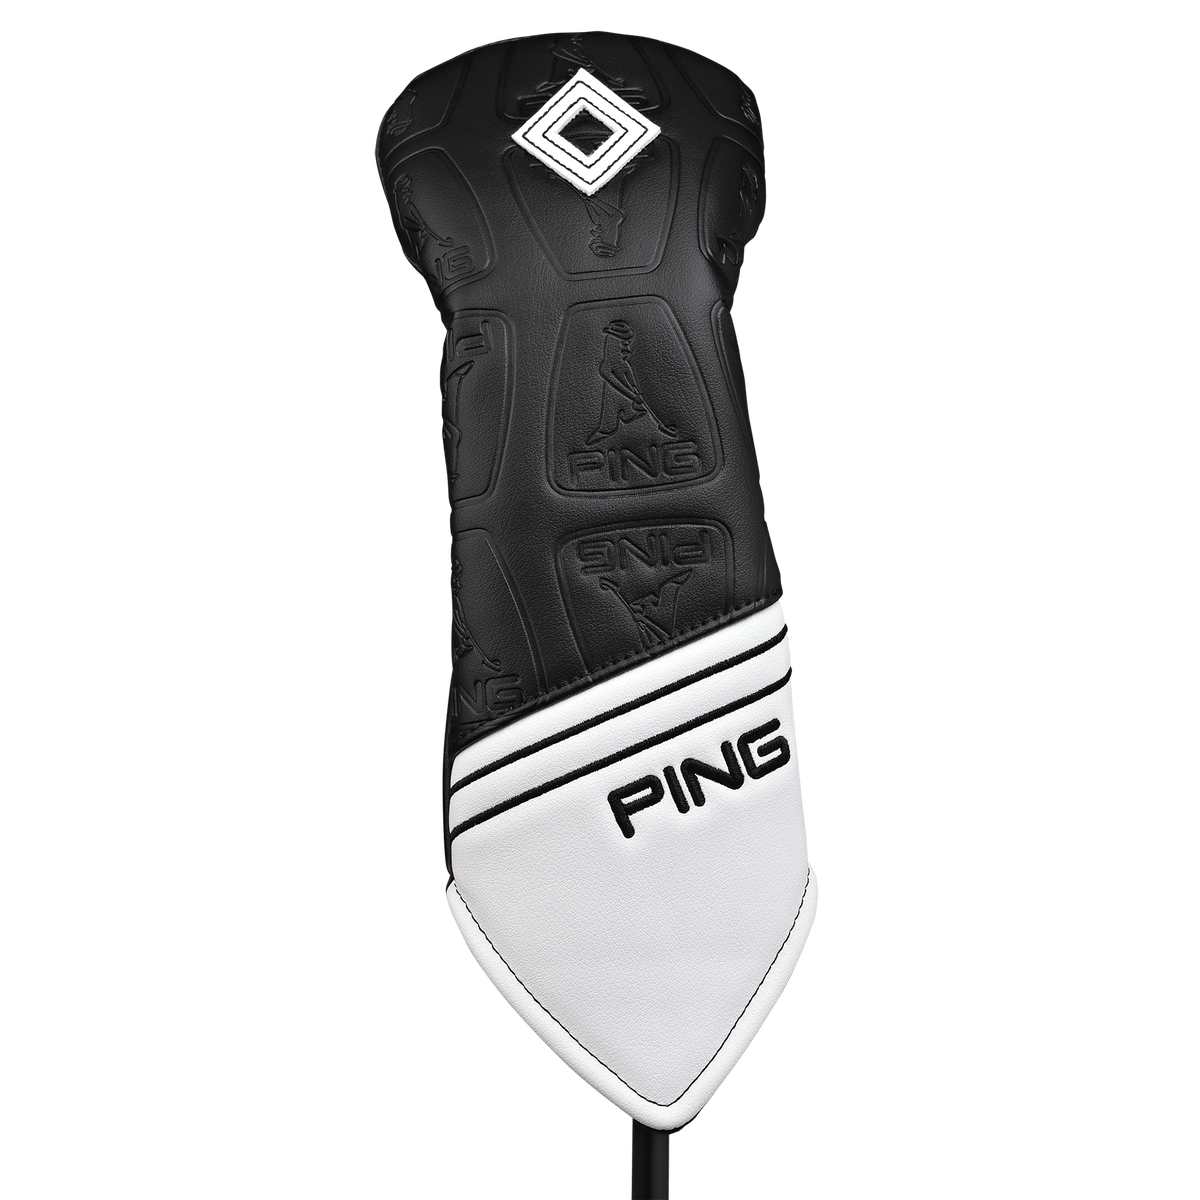 Ping Core Fairway Wood Headcover Pga Tour Superstore 